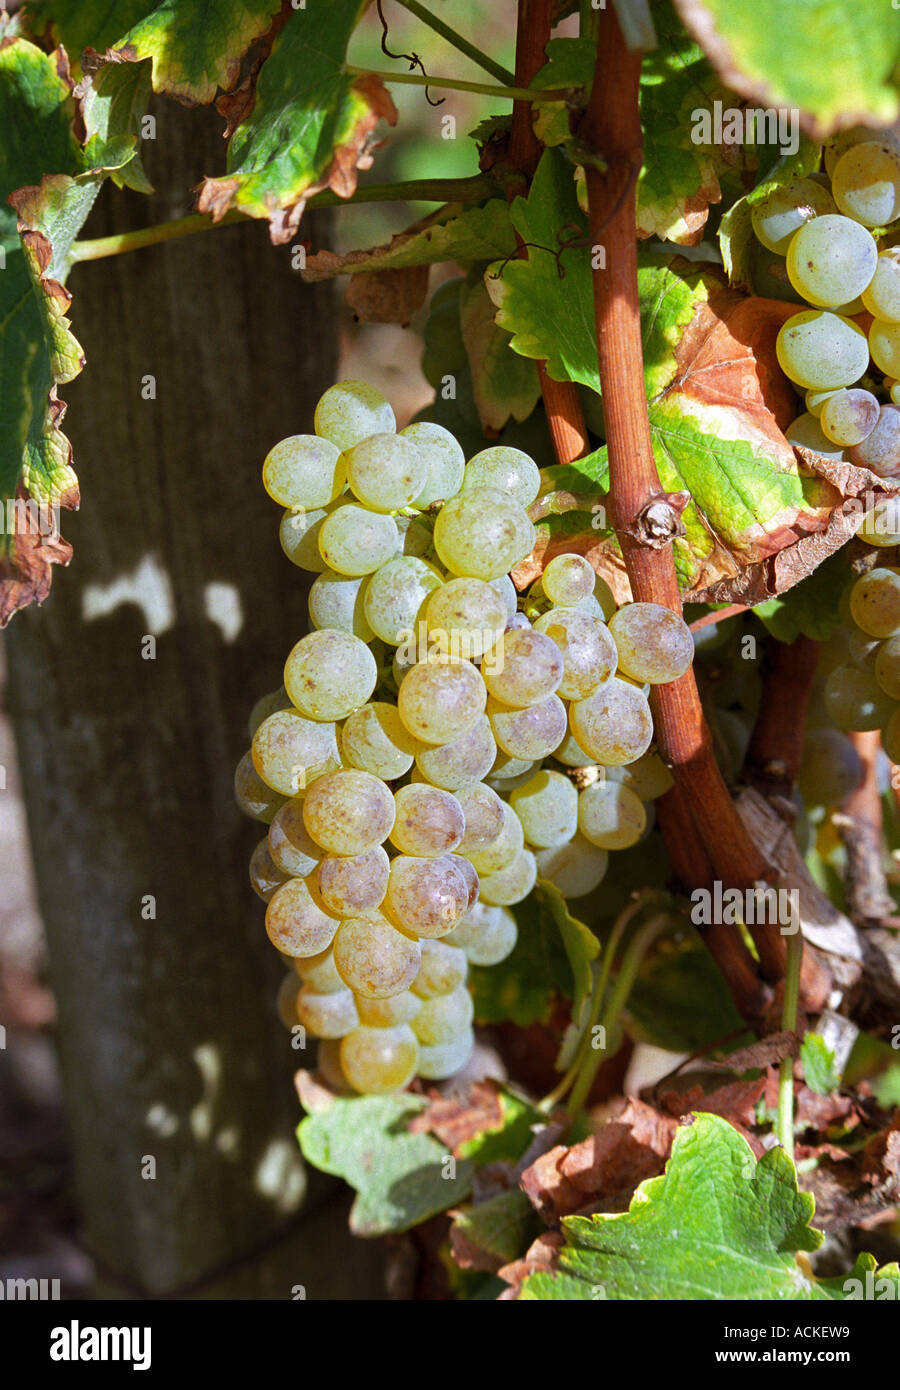 Semillon grapes that have turned colour from green to golden brown brownish but not yet with noble rot   at harvest time  Chateau Raymond Lafon, Meslier, Sauternes, Bordeaux, Aquitaine, Gironde, France, Europe Stock Photo